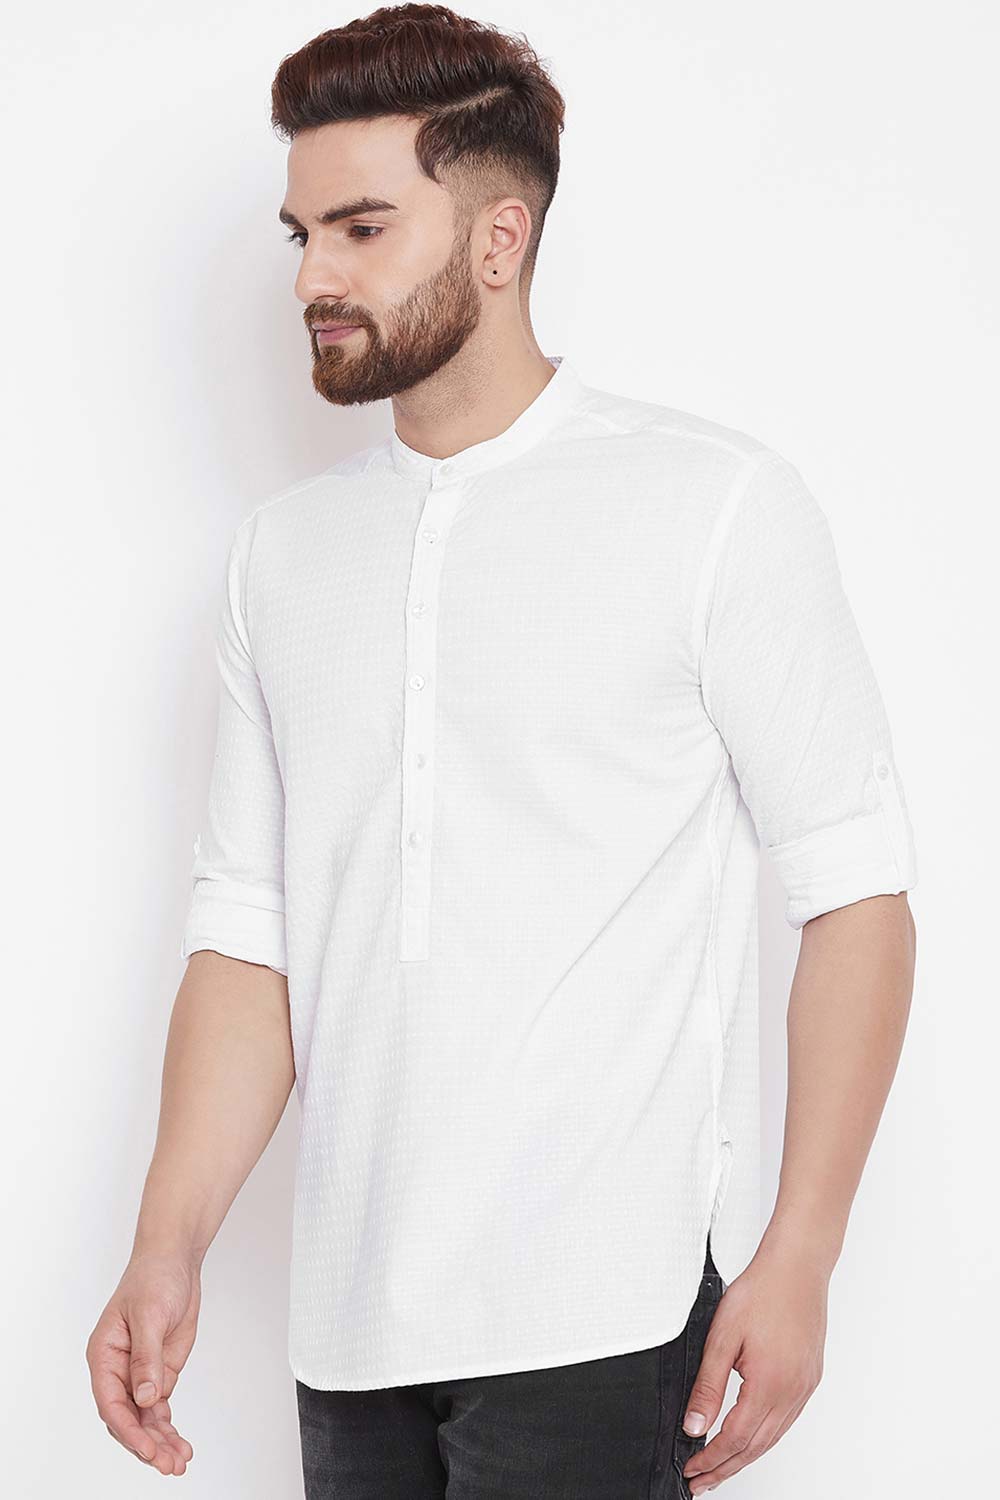 Buy Blended Cotton Solid Kurta in White Online - Front